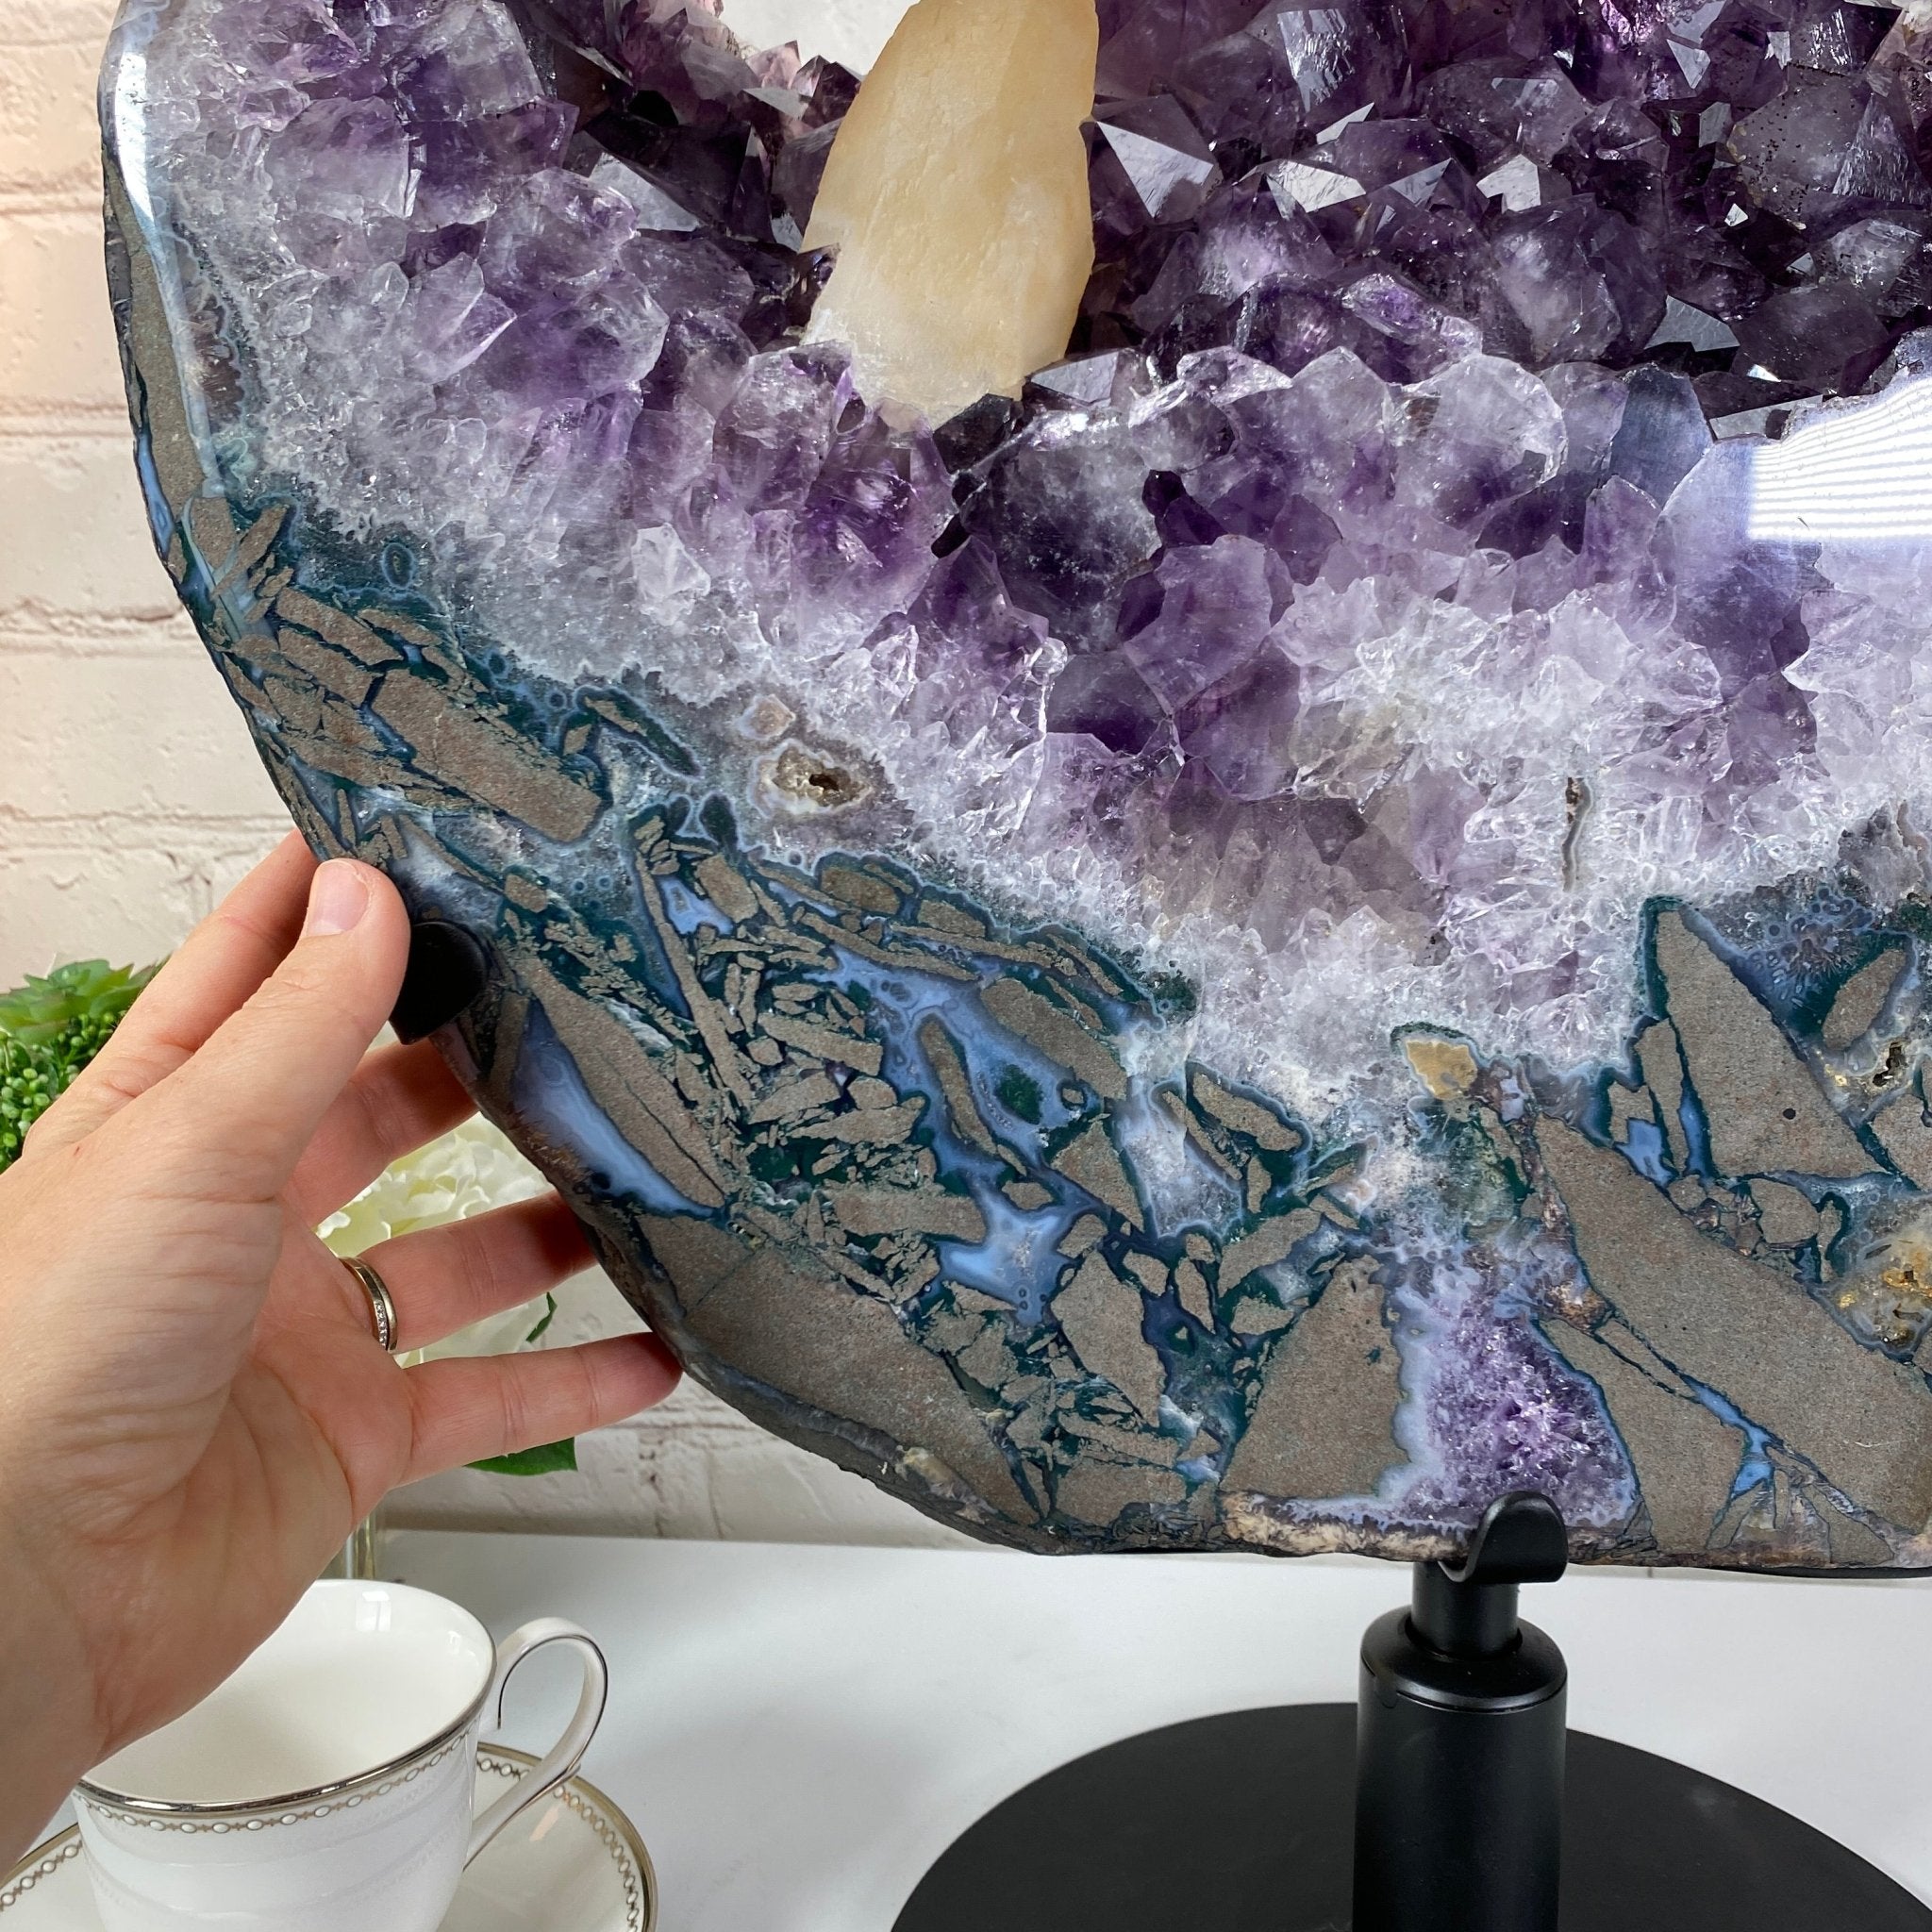 Extra Quality Brazilian Amethyst Crystal Portal on Rotating Stand, 71.2 lbs & 22.5" tall Model #5604-0033 by Brazil Gems - Brazil GemsBrazil GemsExtra Quality Brazilian Amethyst Crystal Portal on Rotating Stand, 71.2 lbs & 22.5" tall Model #5604-0033 by Brazil GemsPortals on Rotating Bases5604-0033